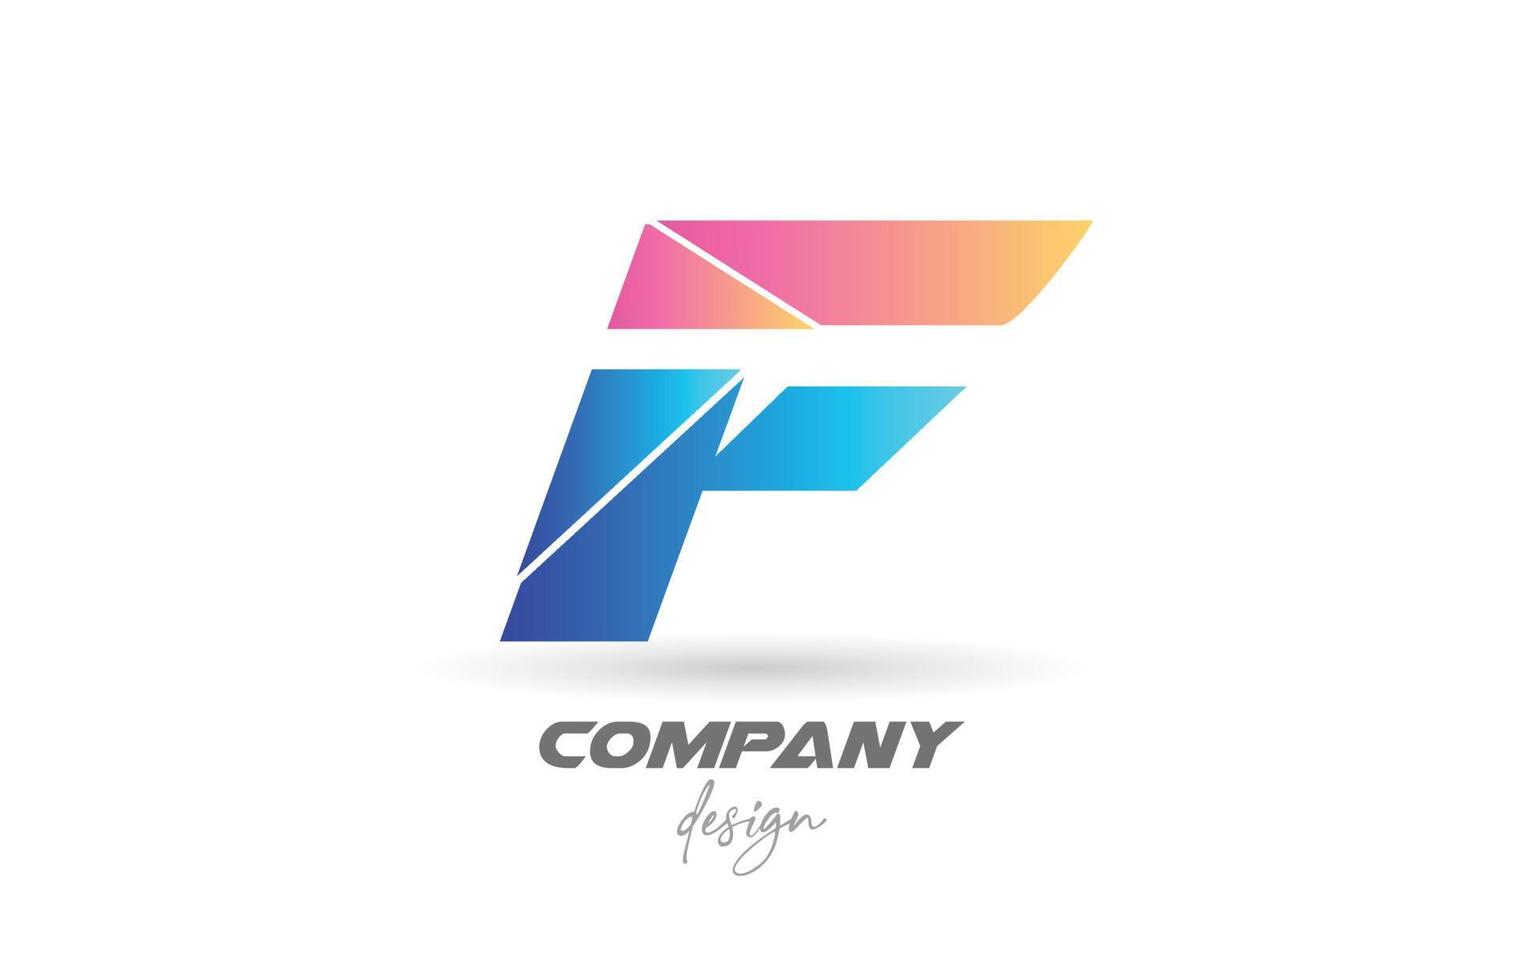 Colorful F alphabet letter logo icon with sliced design and blue pink colors. Creative template for business and company vector